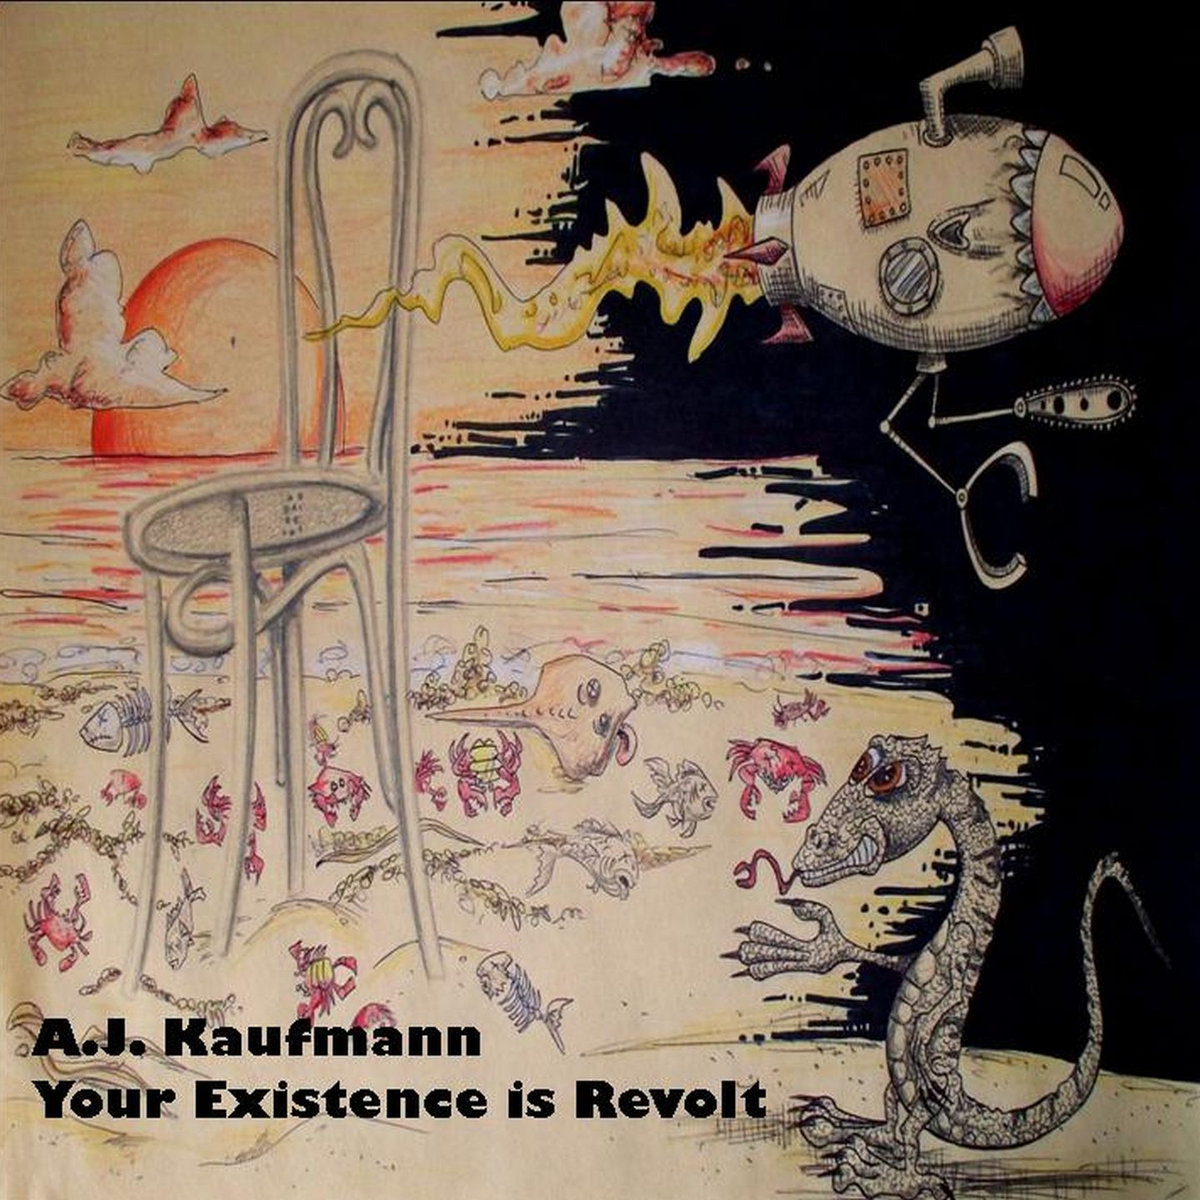 New Music: Your Existence is Revolt by A.J. Kaufmann